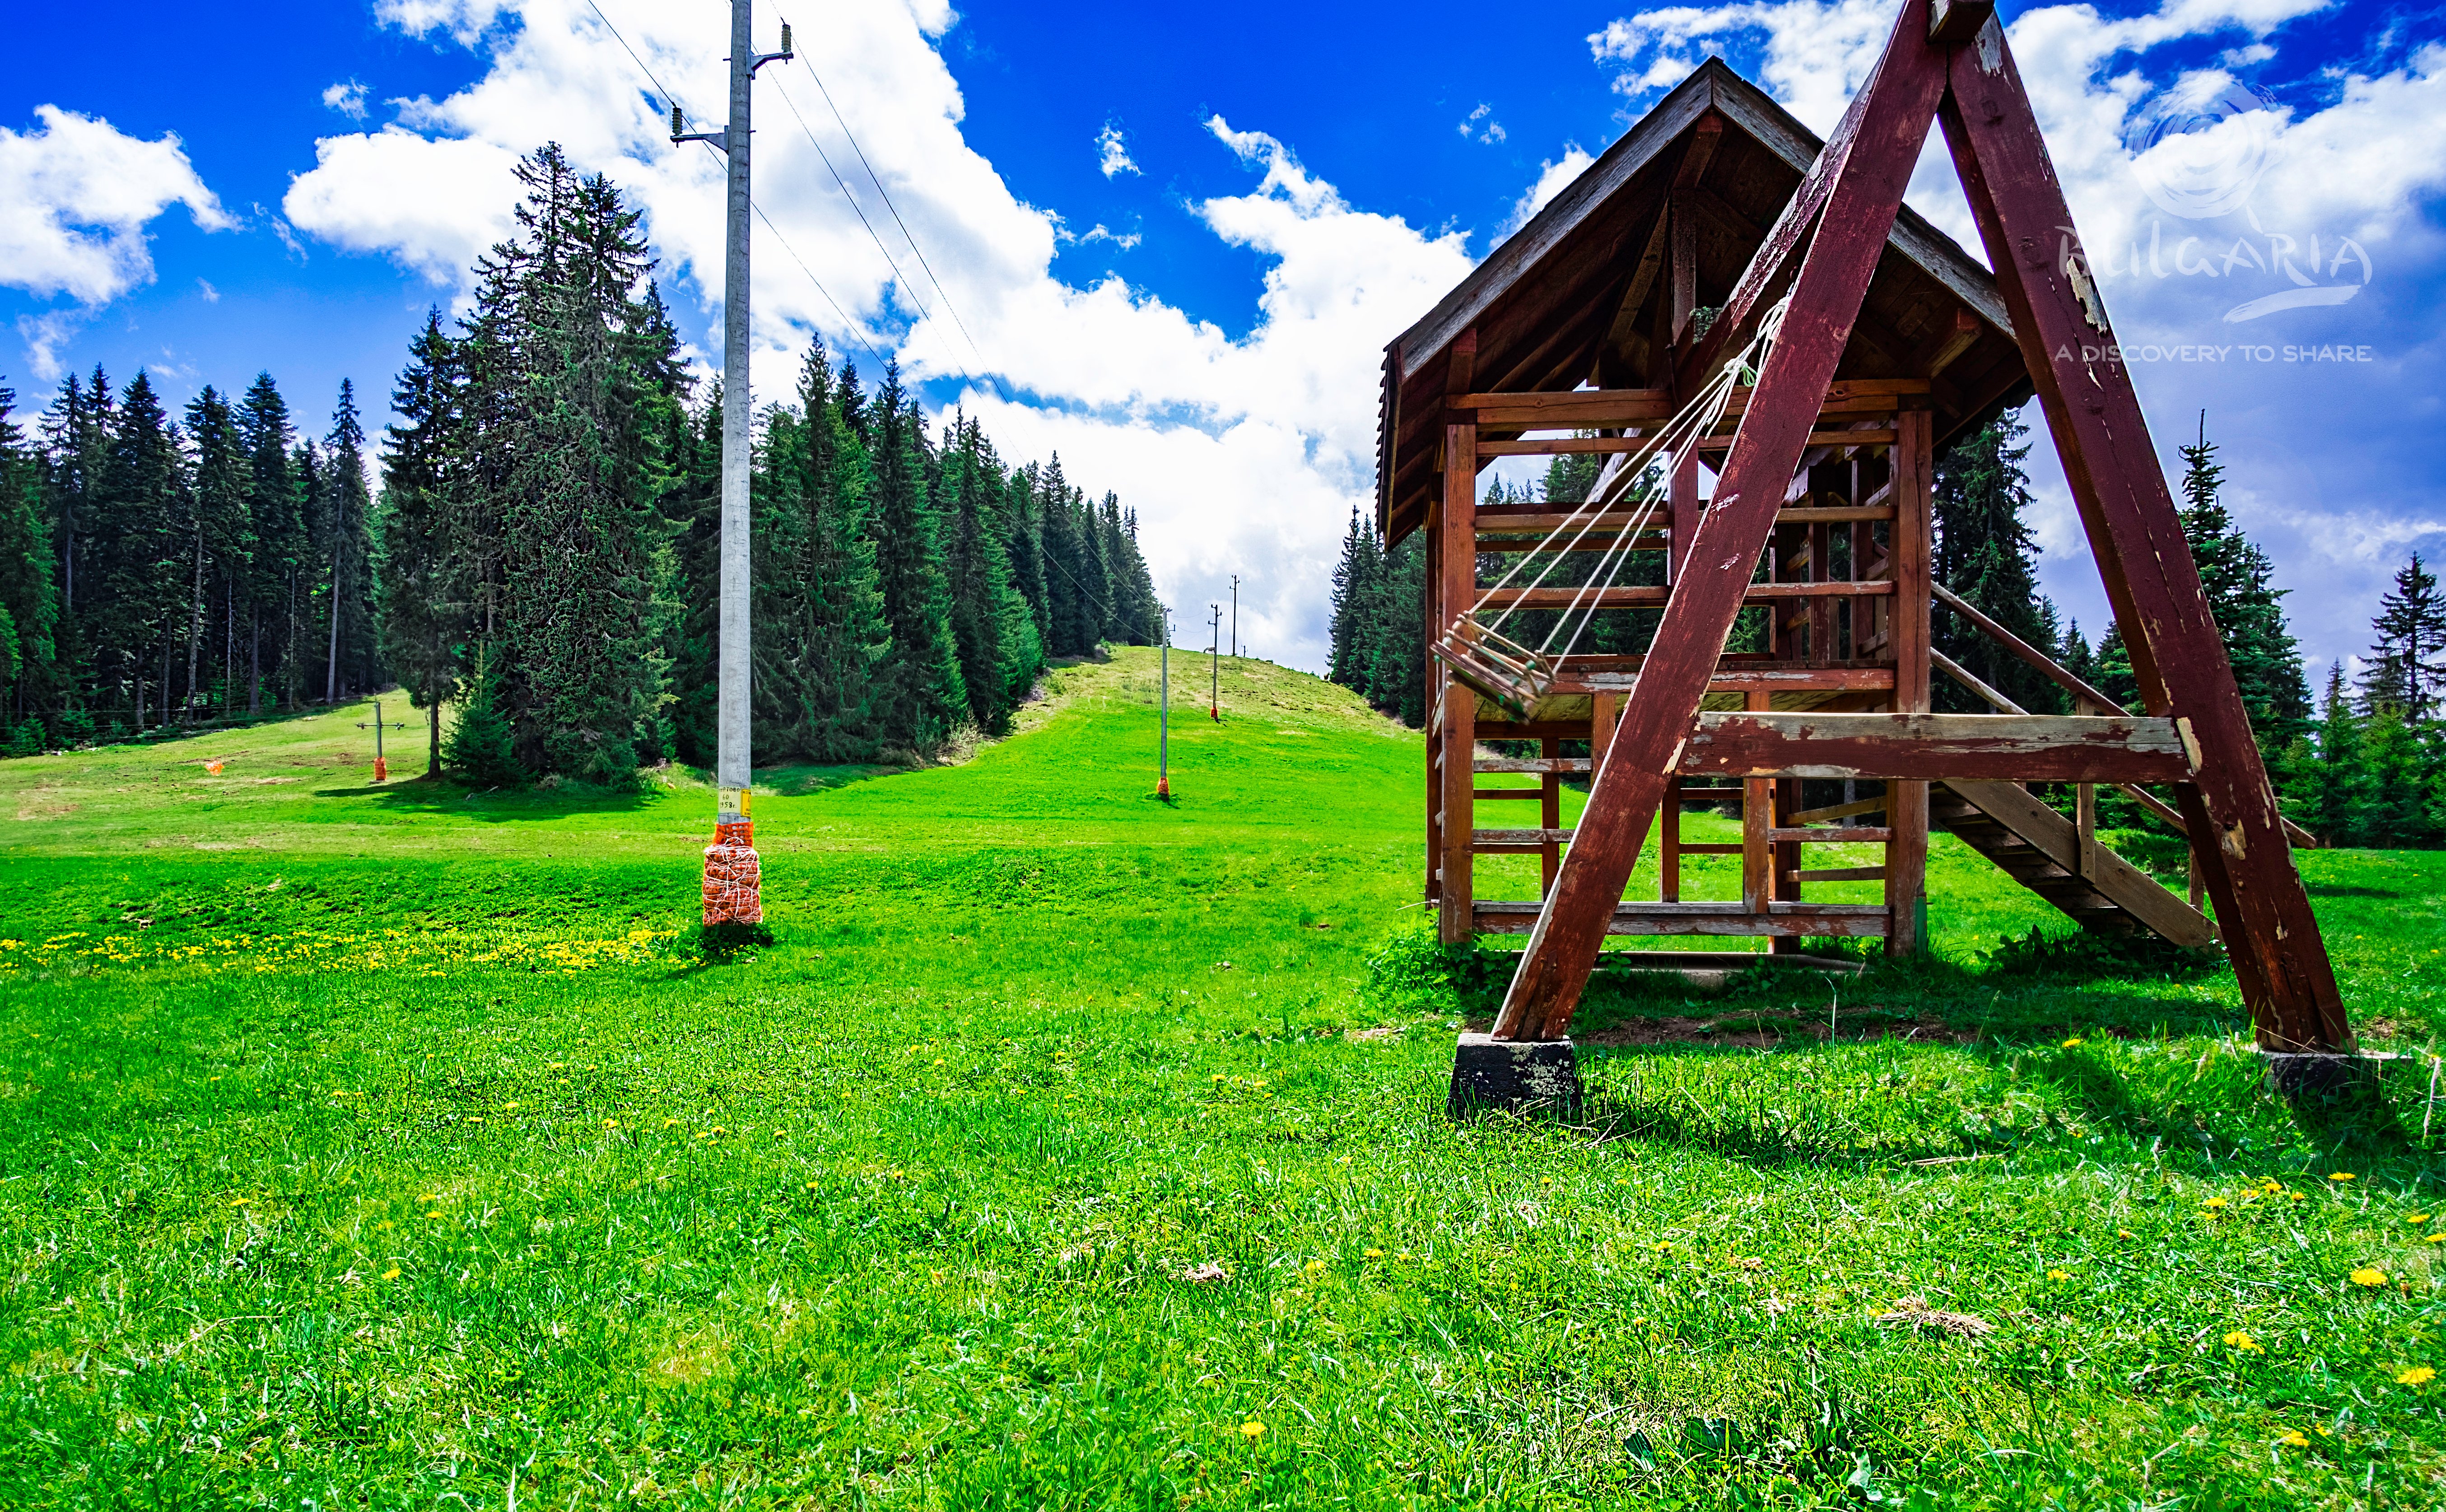 a wooden structure on a grassy hill